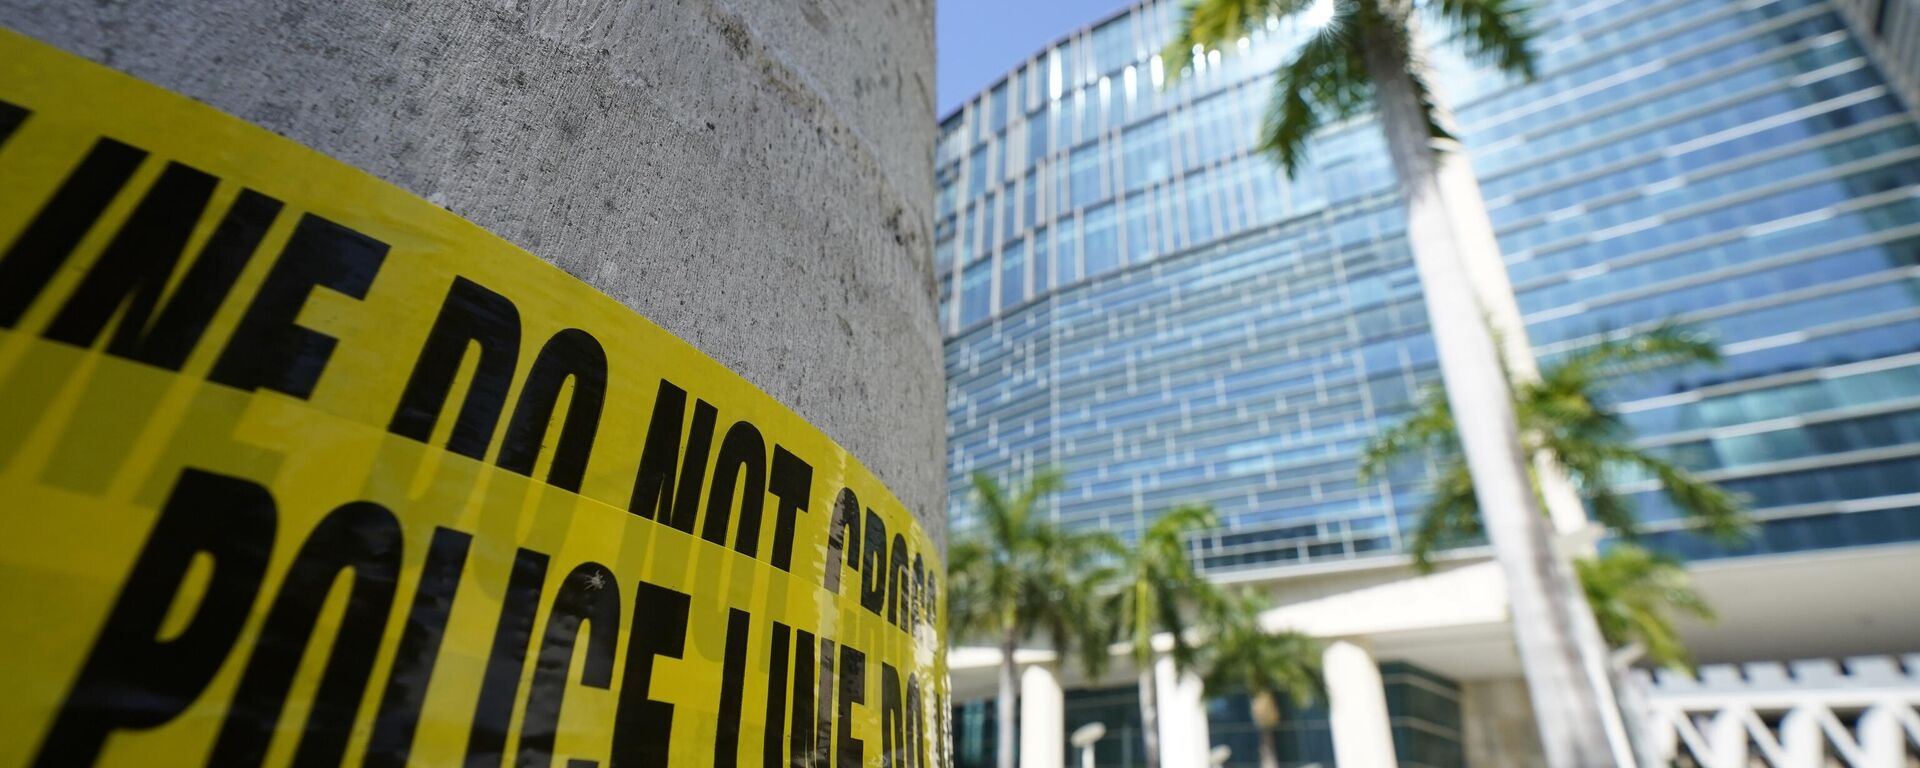 Police tape is wrapped around a palm tree outside the Wilkie D. Ferguson Jr. U.S. Courthouse, Monday, June 12, 2023, in Miami, Fla. Former President Donald Trump is set to appear at the federal court Tuesday, on dozens of felony charges accusing him of illegally hoarding classified information. - Sputnik International, 1920, 13.06.2023